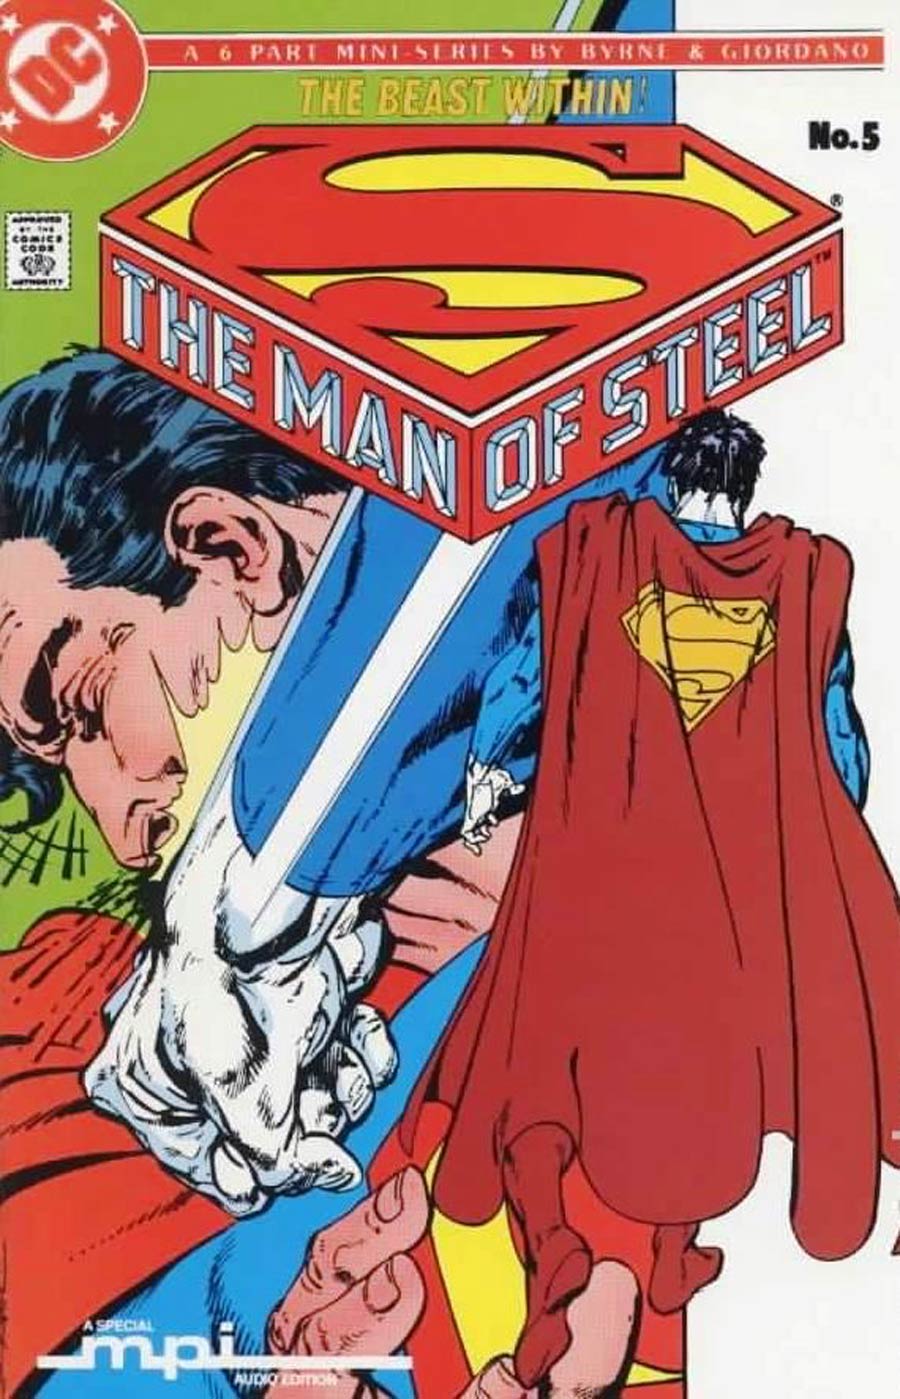 Man Of Steel #5 Cover C MPI Audio Edition Without Cassette Tape